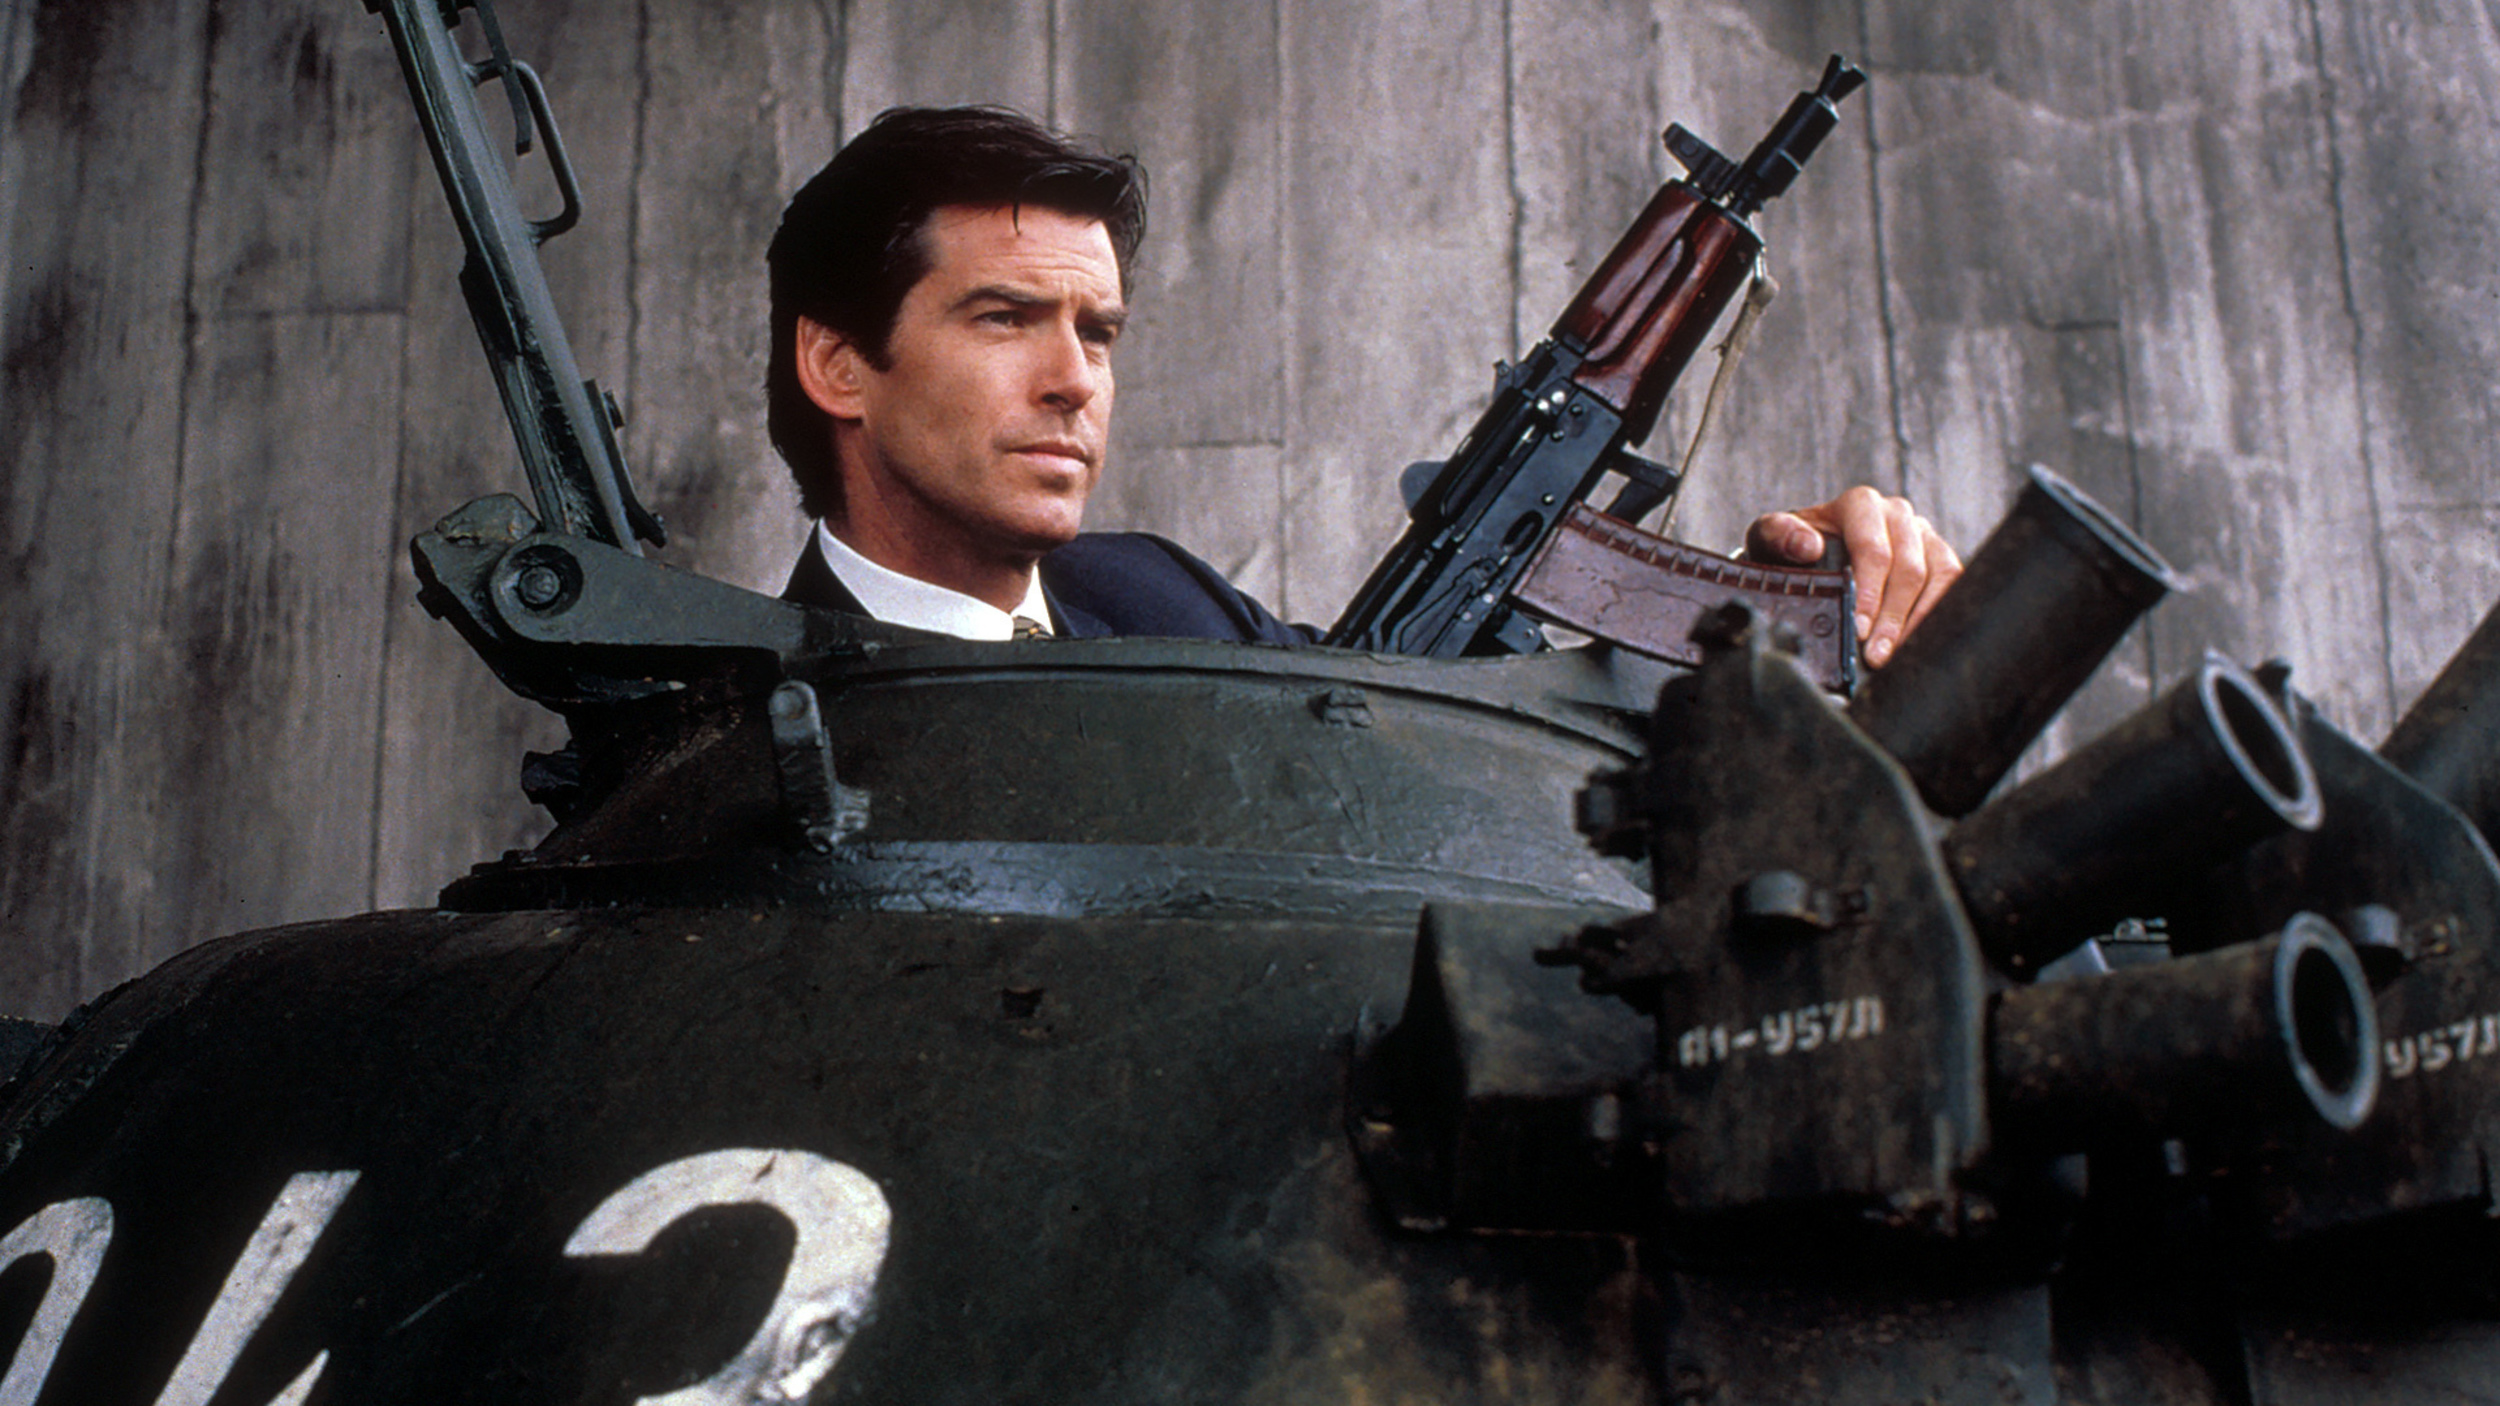 <p>“You were expecting someone else,” asked Pierce Brosnan in the sleek teaser for “GoldenEye." Bond fans had actually been expecting him for close to a decade, but "Cubby" Broccoli blanched at a television star taking over the larger-than-life role in 1986 after Moore, a former television star, exited the franchise. Better late than never — for one film, at least. The series’ Mr. Fix-It, Martin Campbell, delivered an extravagantly entertaining (if somewhat bloated) film that made Brosnan the movie star he was always destined to be. Famke Janssen’s Xenia Onatopp, with her midsection crushing thighs, is a ridiculously sexy villainess. They should’ve made her the new Blofeld.</p><p><a href='https://www.msn.com/en-us/community/channel/vid-cj9pqbr0vn9in2b6ddcd8sfgpfq6x6utp44fssrv6mc2gtybw0us'>Follow us on MSN to see more of our exclusive entertainment content.</a></p>